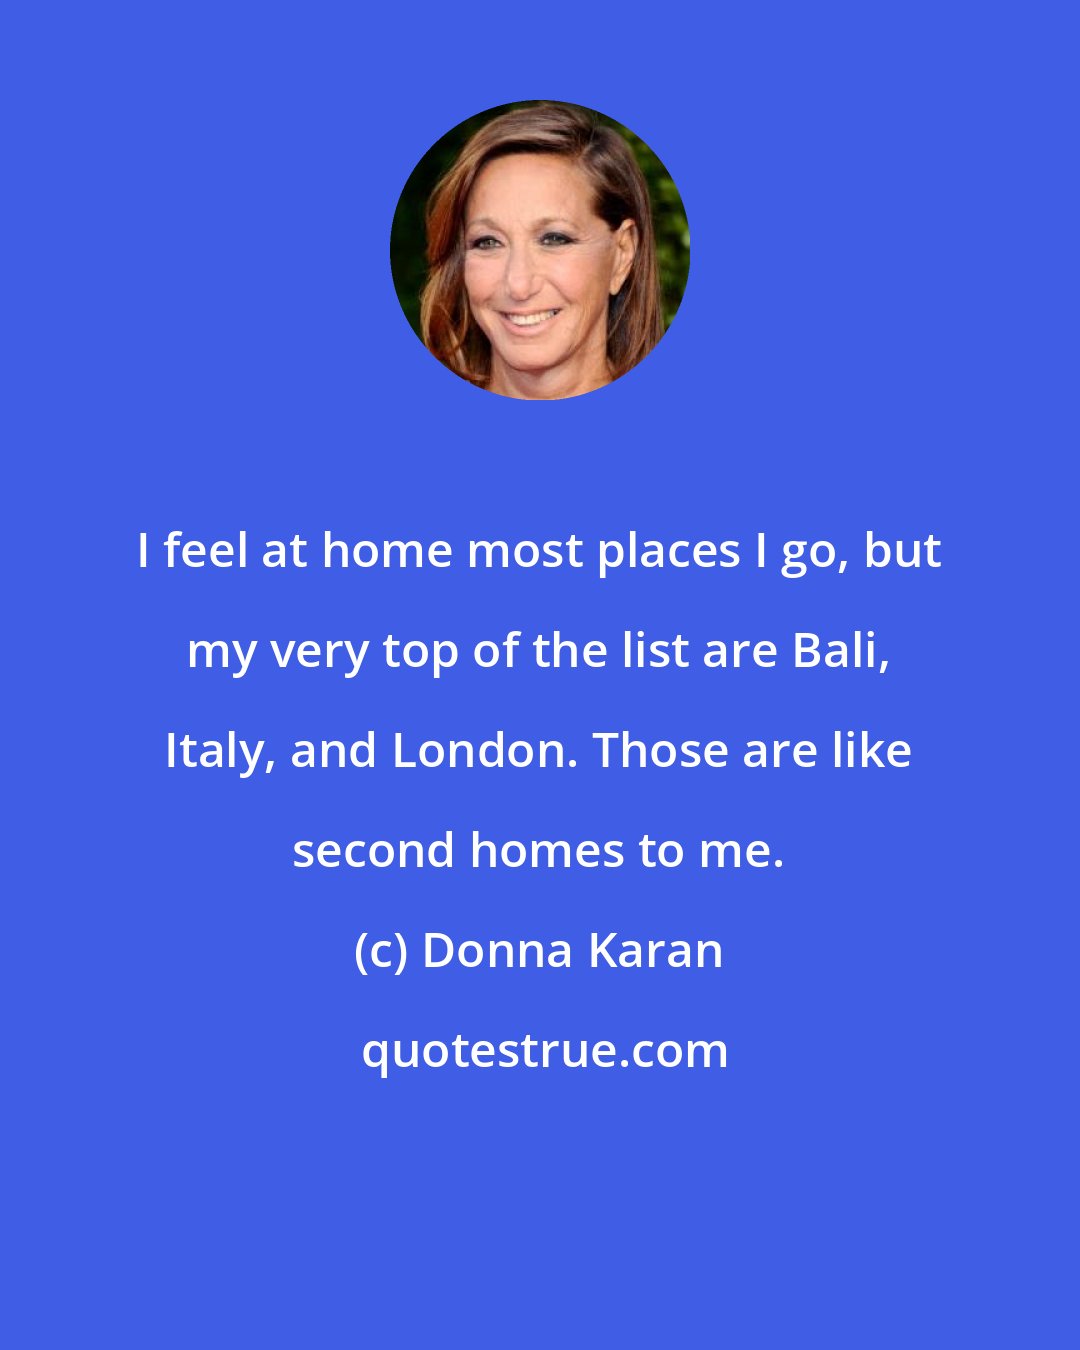 Donna Karan: I feel at home most places I go, but my very top of the list are Bali, Italy, and London. Those are like second homes to me.